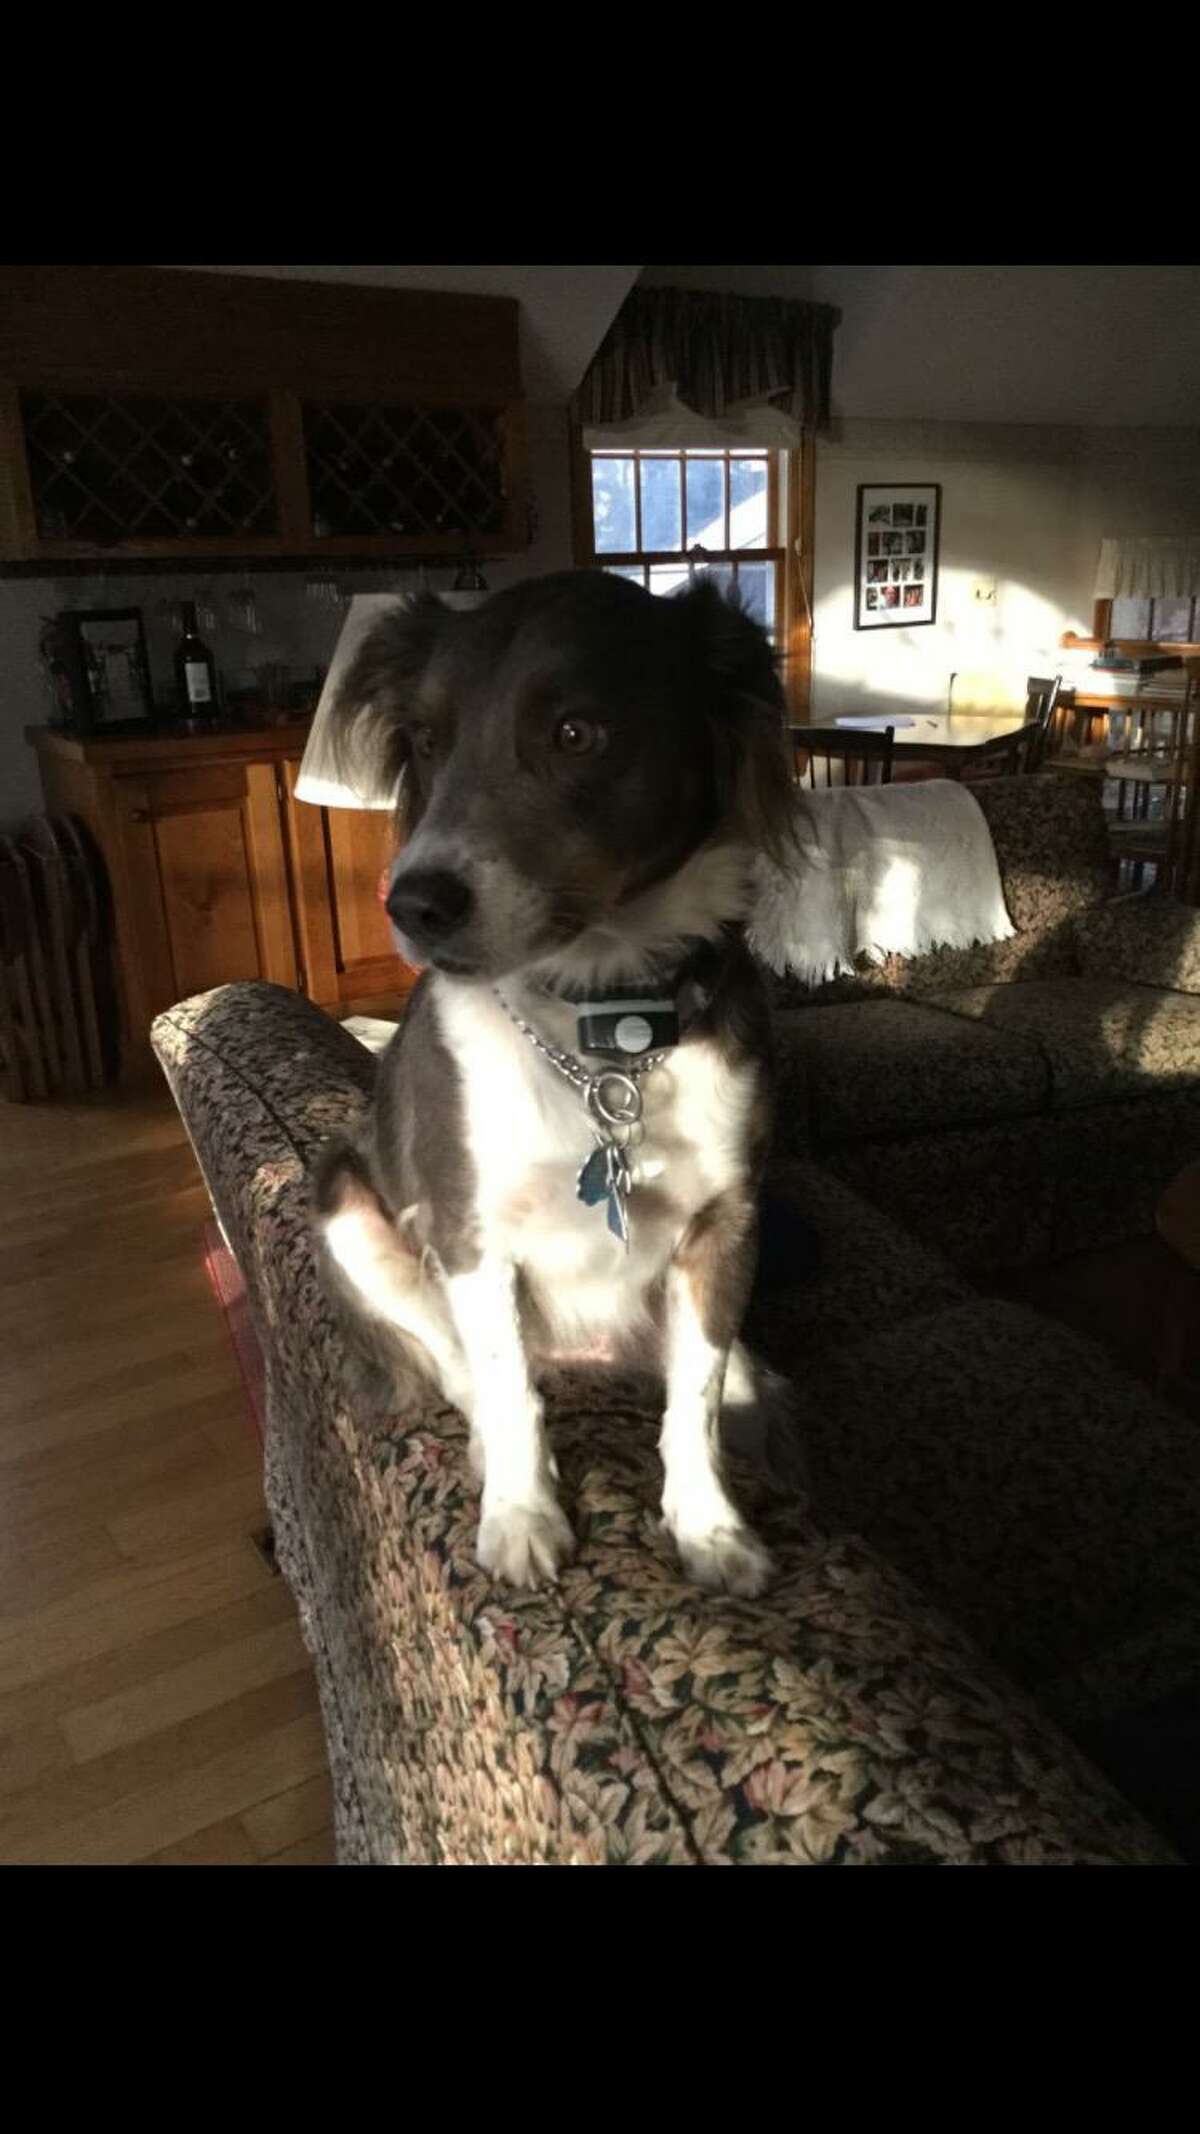 A 25-pound Australian shepherd mix named Everett has gone missing in the vicinity of Deer Run Road and Spectacle Lane. If anyone sees him, they are asked to call his family.